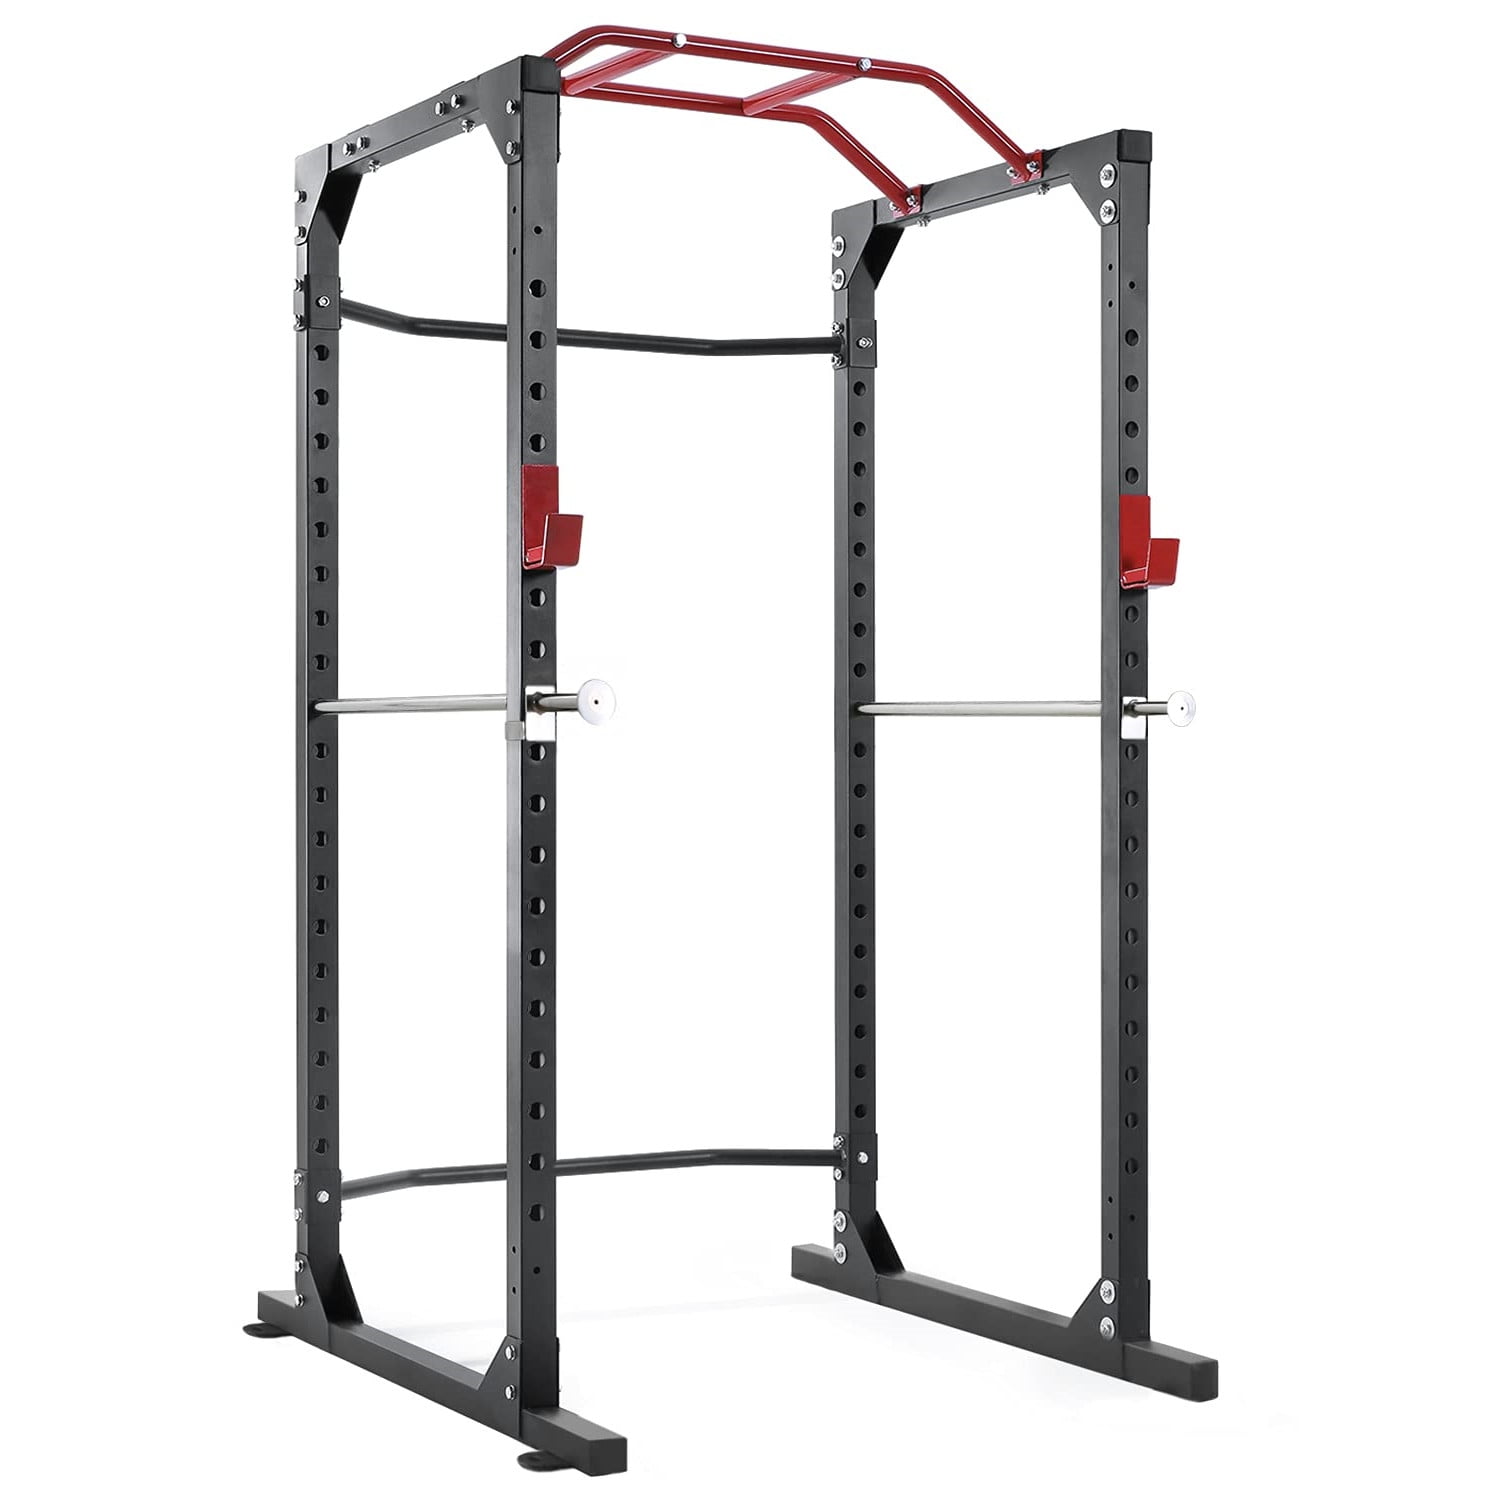 Details about   Power Rack Weight Lifting Squat Stand Strength Training Home Gym Power Cage US 